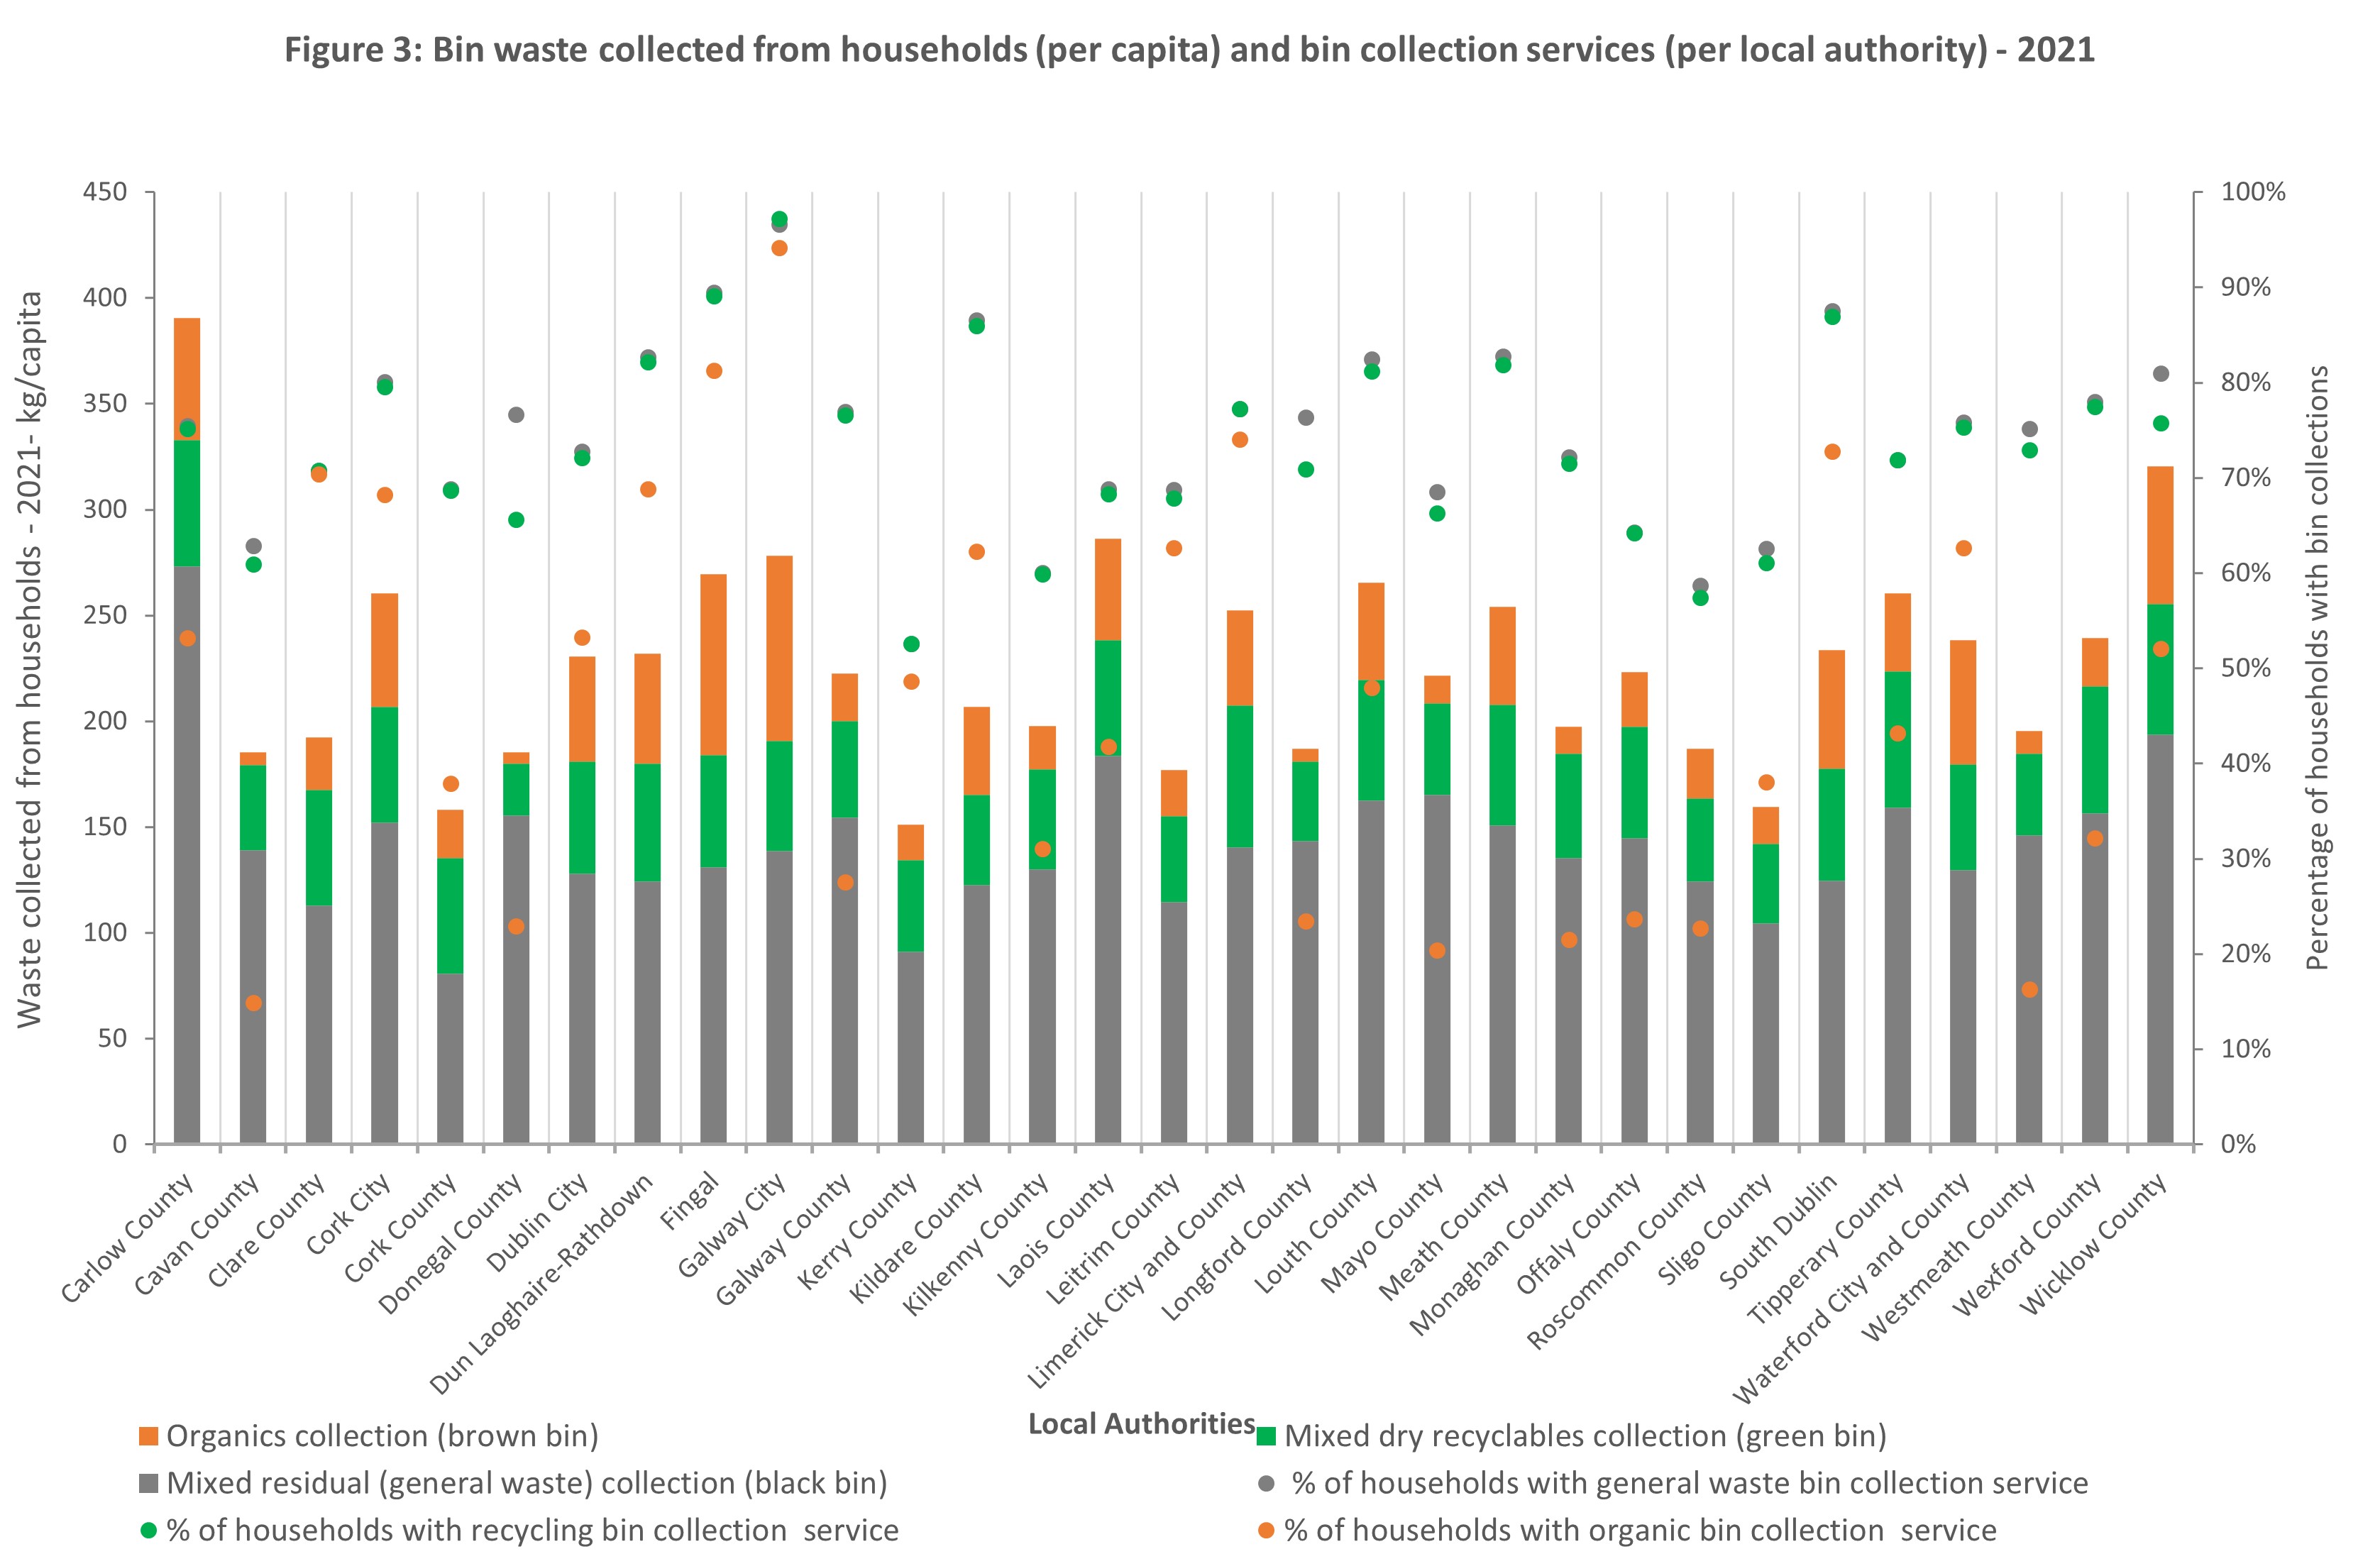 The amount of household bin waste per capita and local authority area